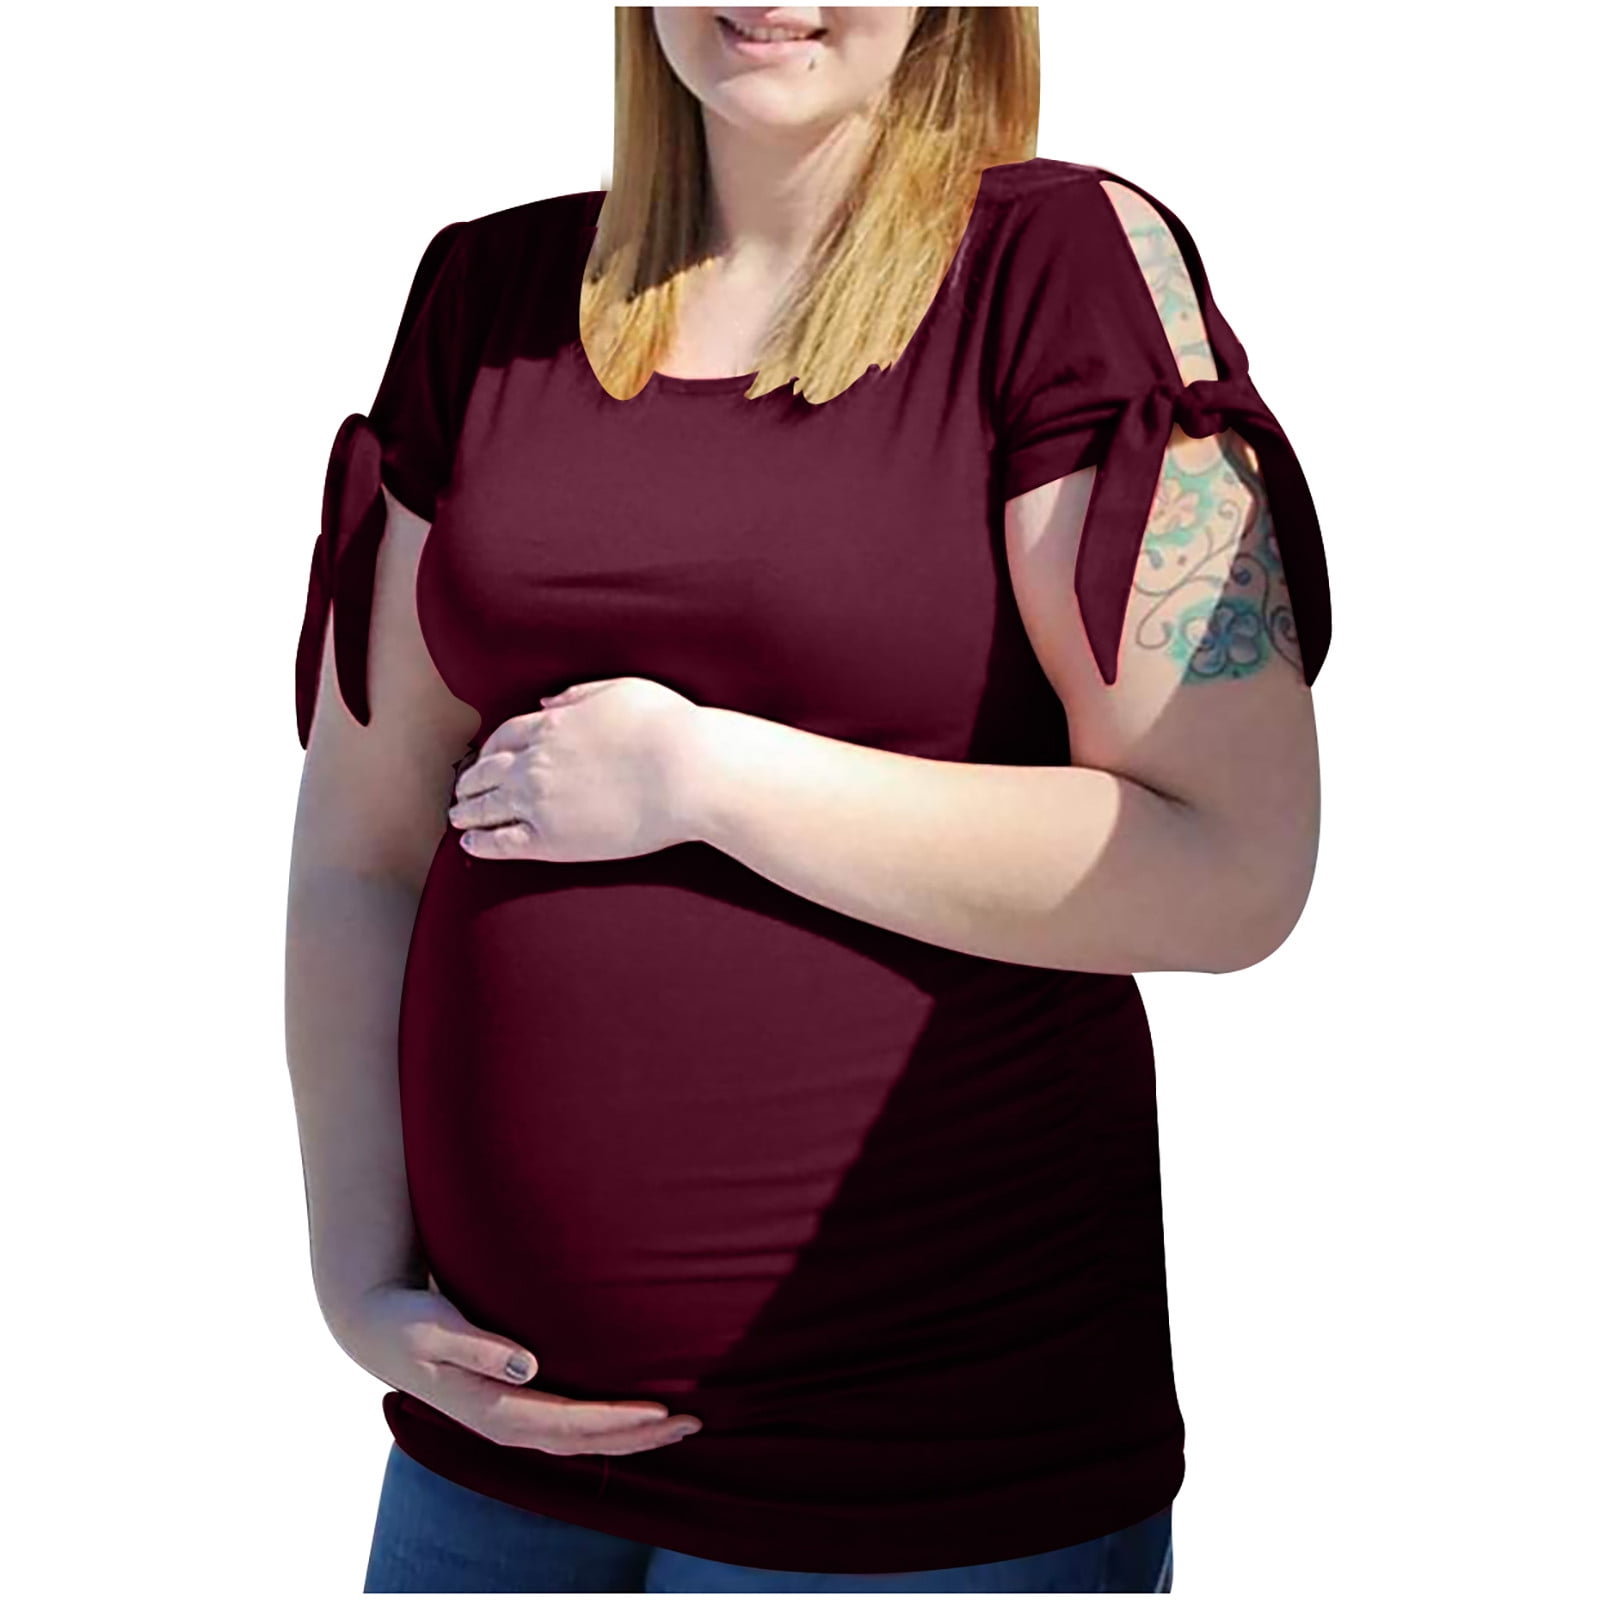 Soft Stretchable fabric with Side Ruched Tunic Pregnancy Top Clothes Women's Maternity Shirt Short Sleeve 